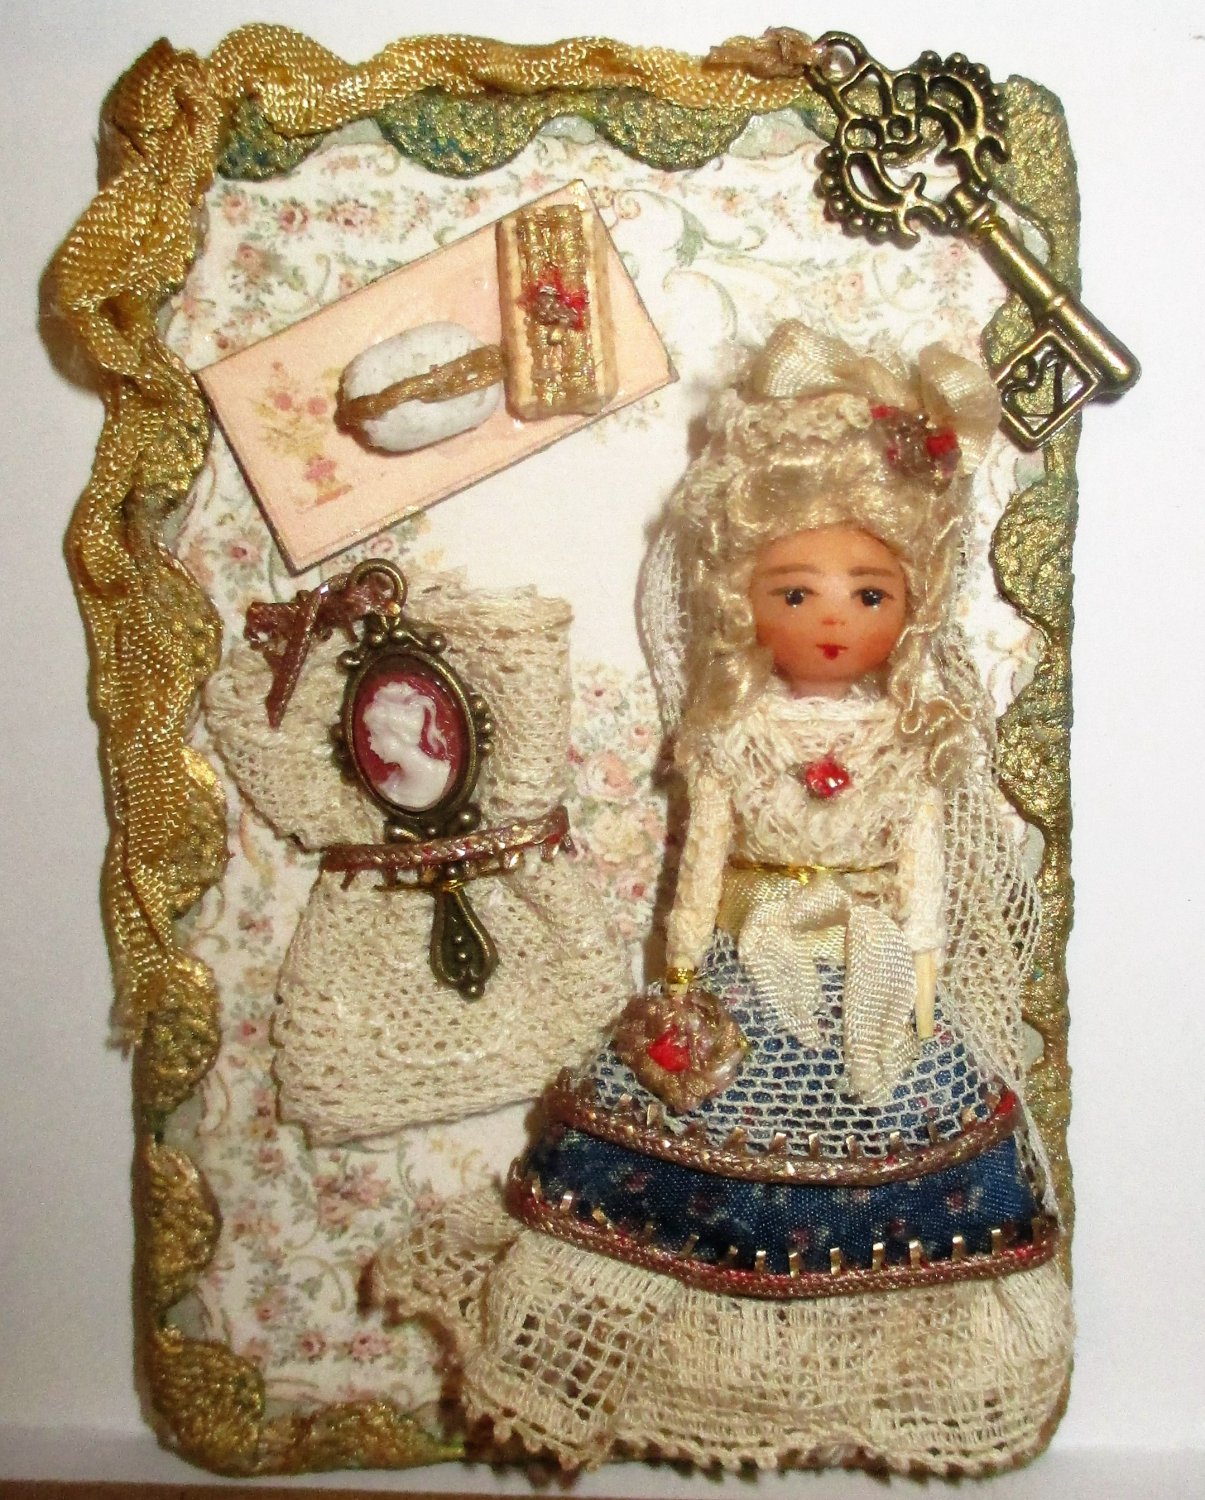 Mini 21/2" one of a kind Artist doll's doll on accessory card